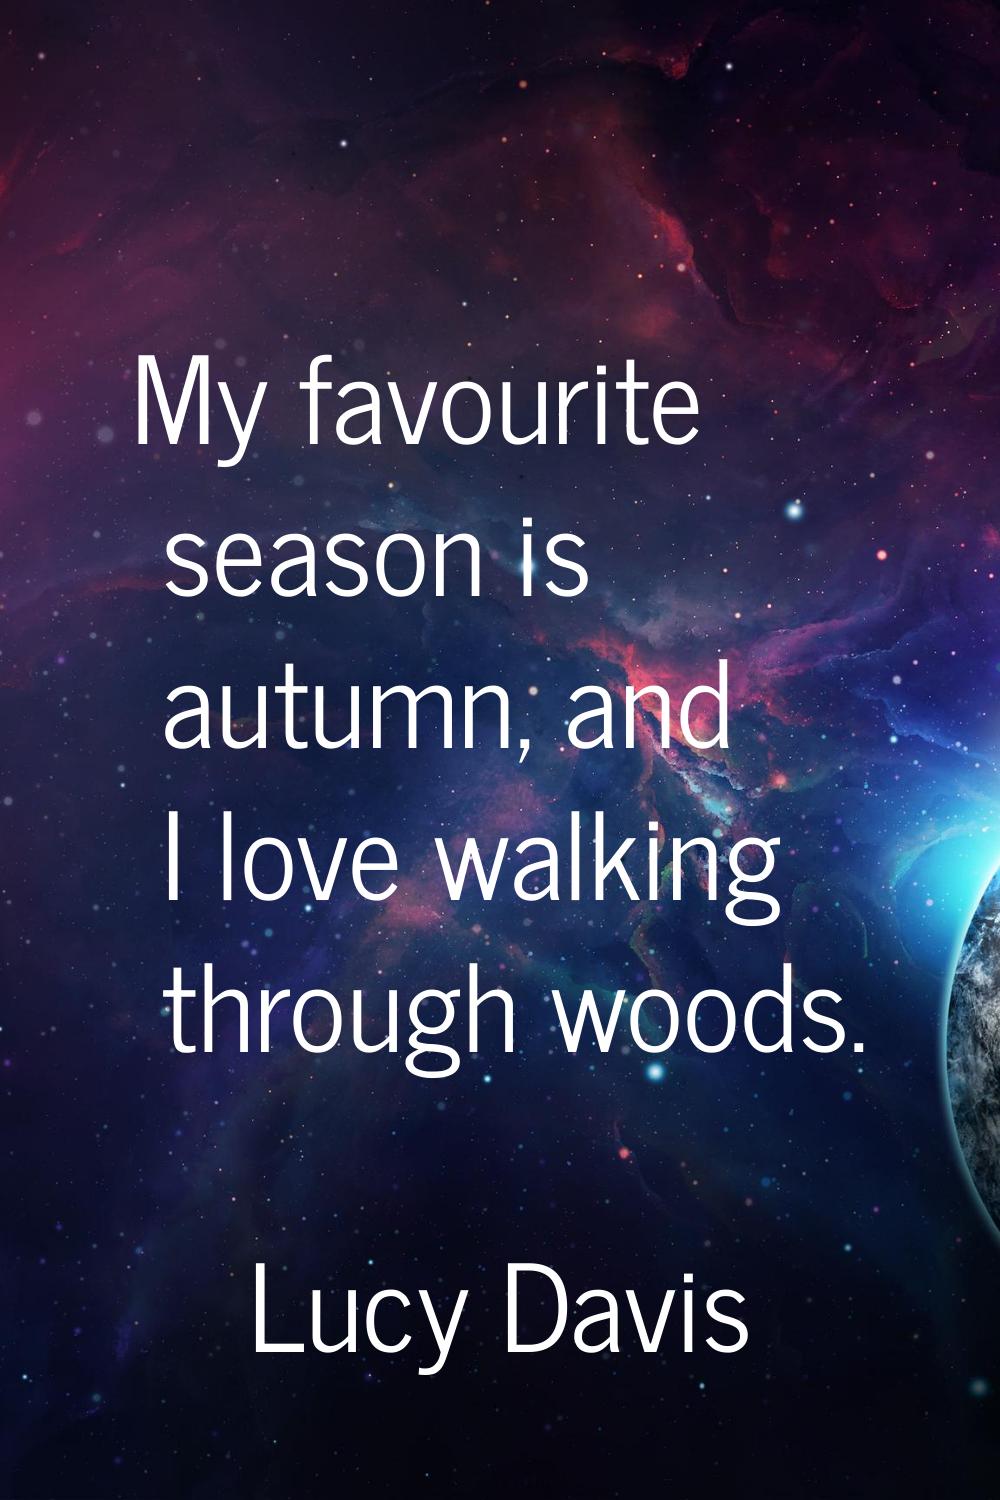 My favourite season is autumn, and I love walking through woods.